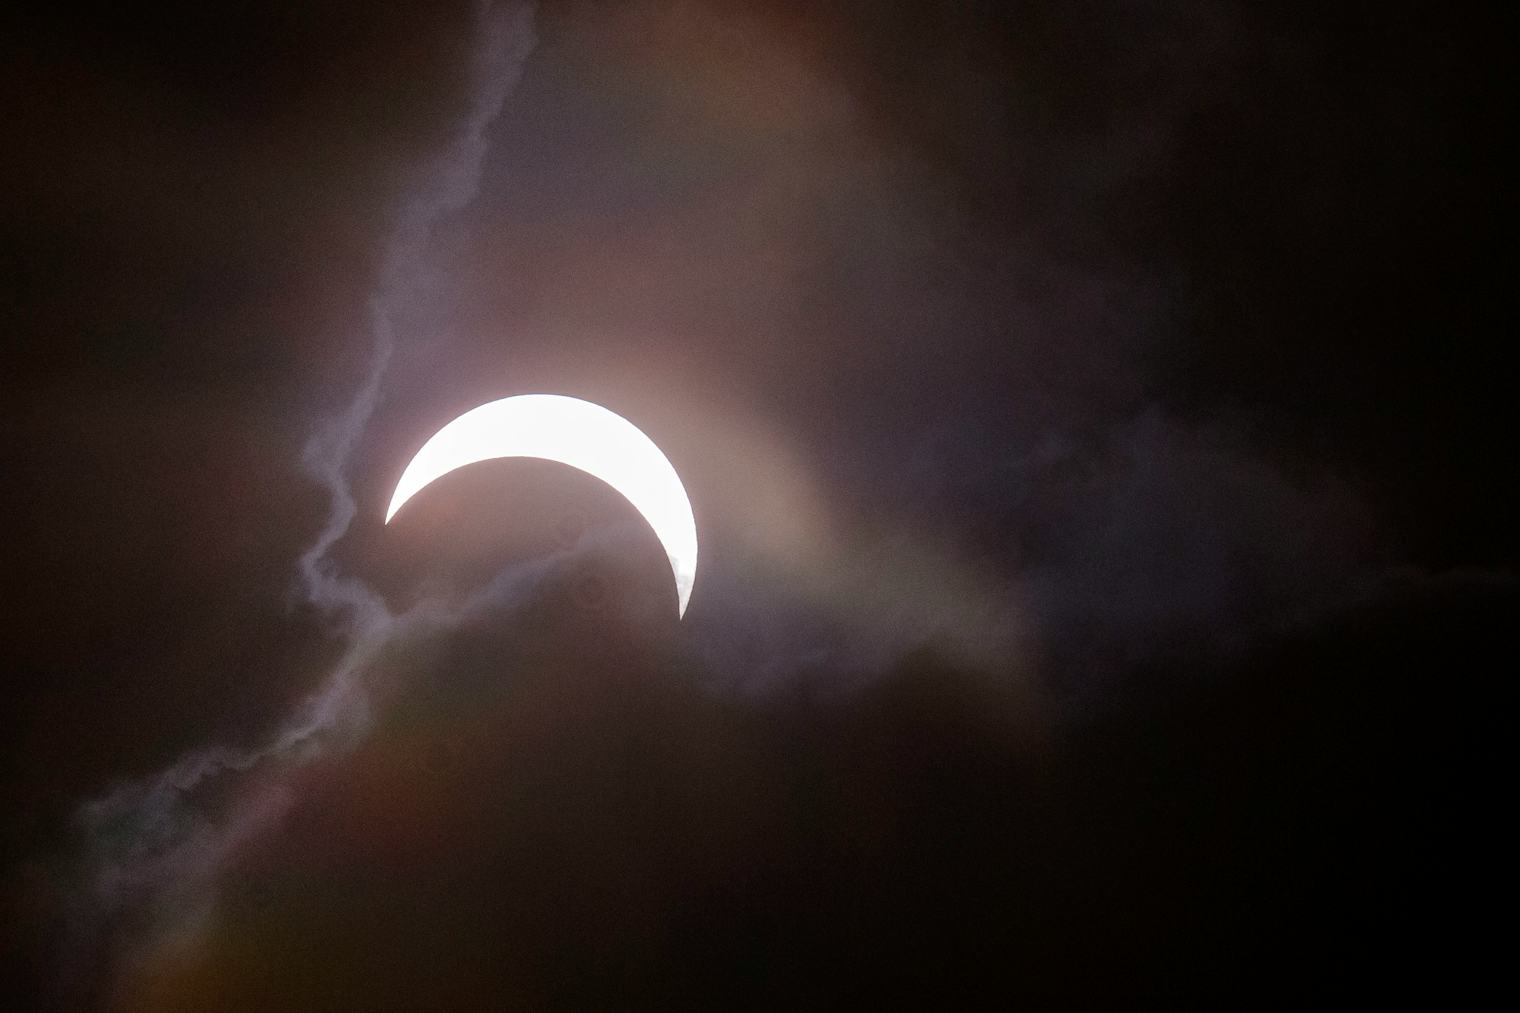 Where To Watch The Solar Eclipse In New York, Because You Don't Want To